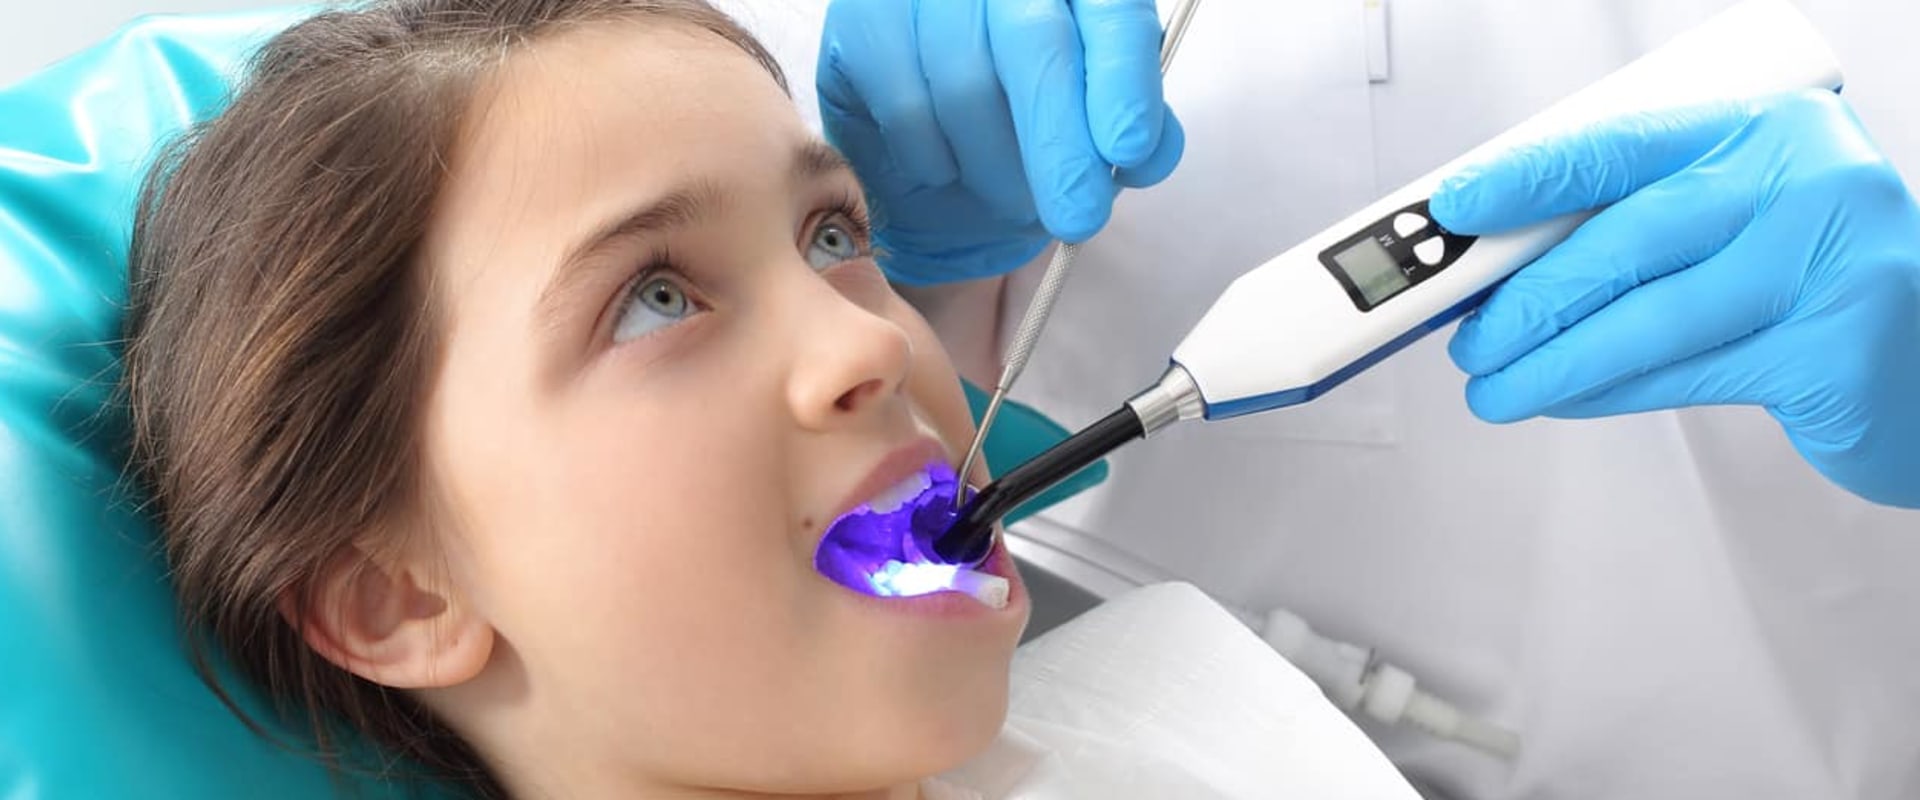 Is laser filling good for teeth?